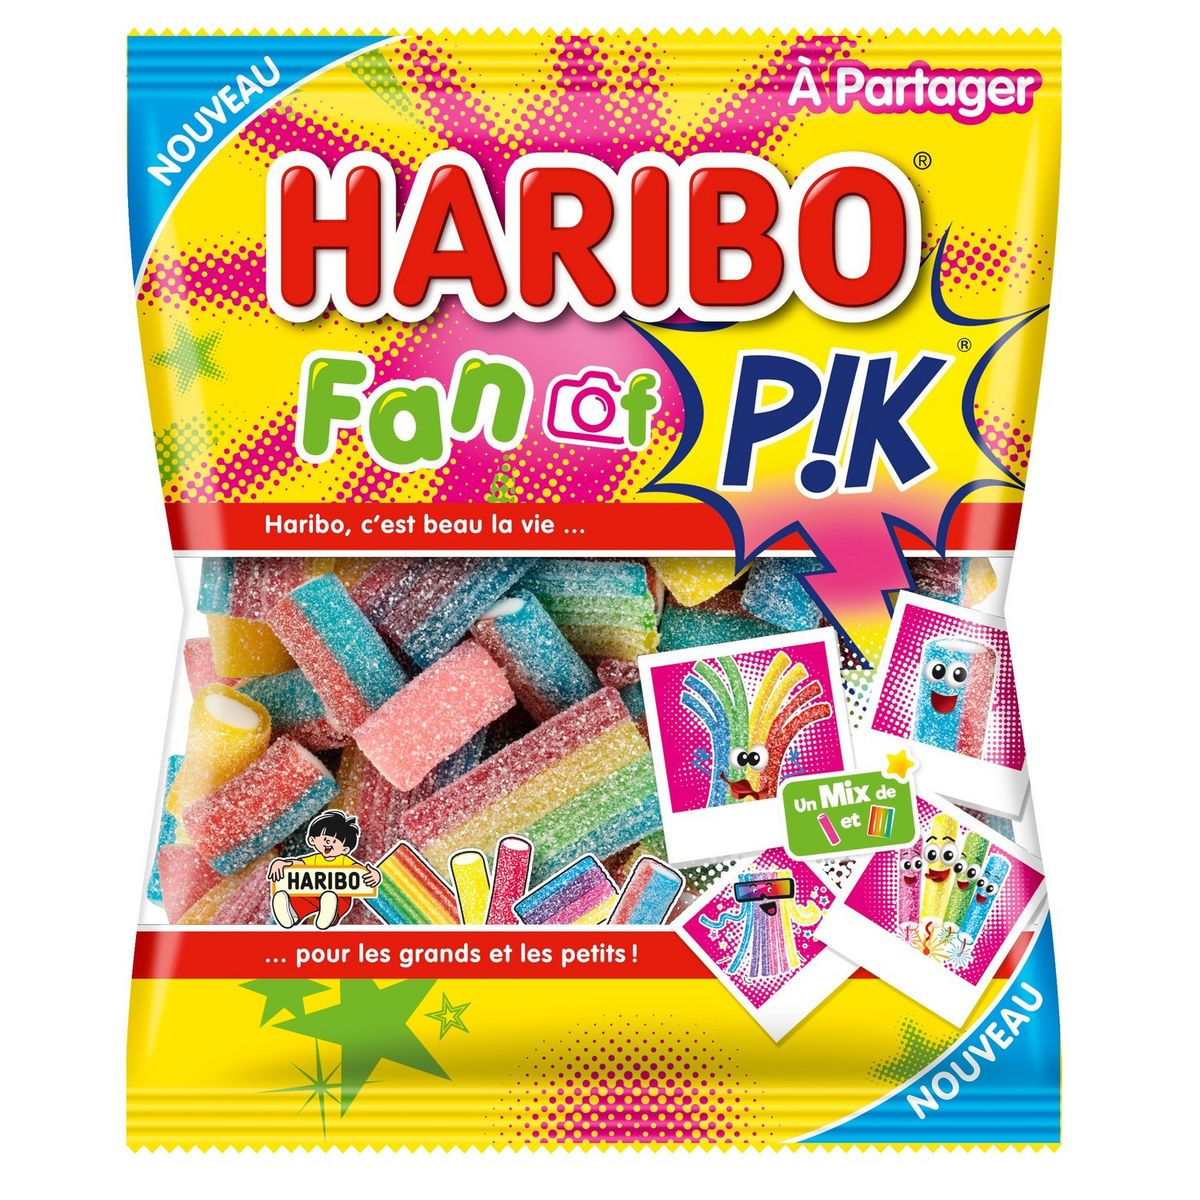 Haribo Fan of pik tangy candies 200g